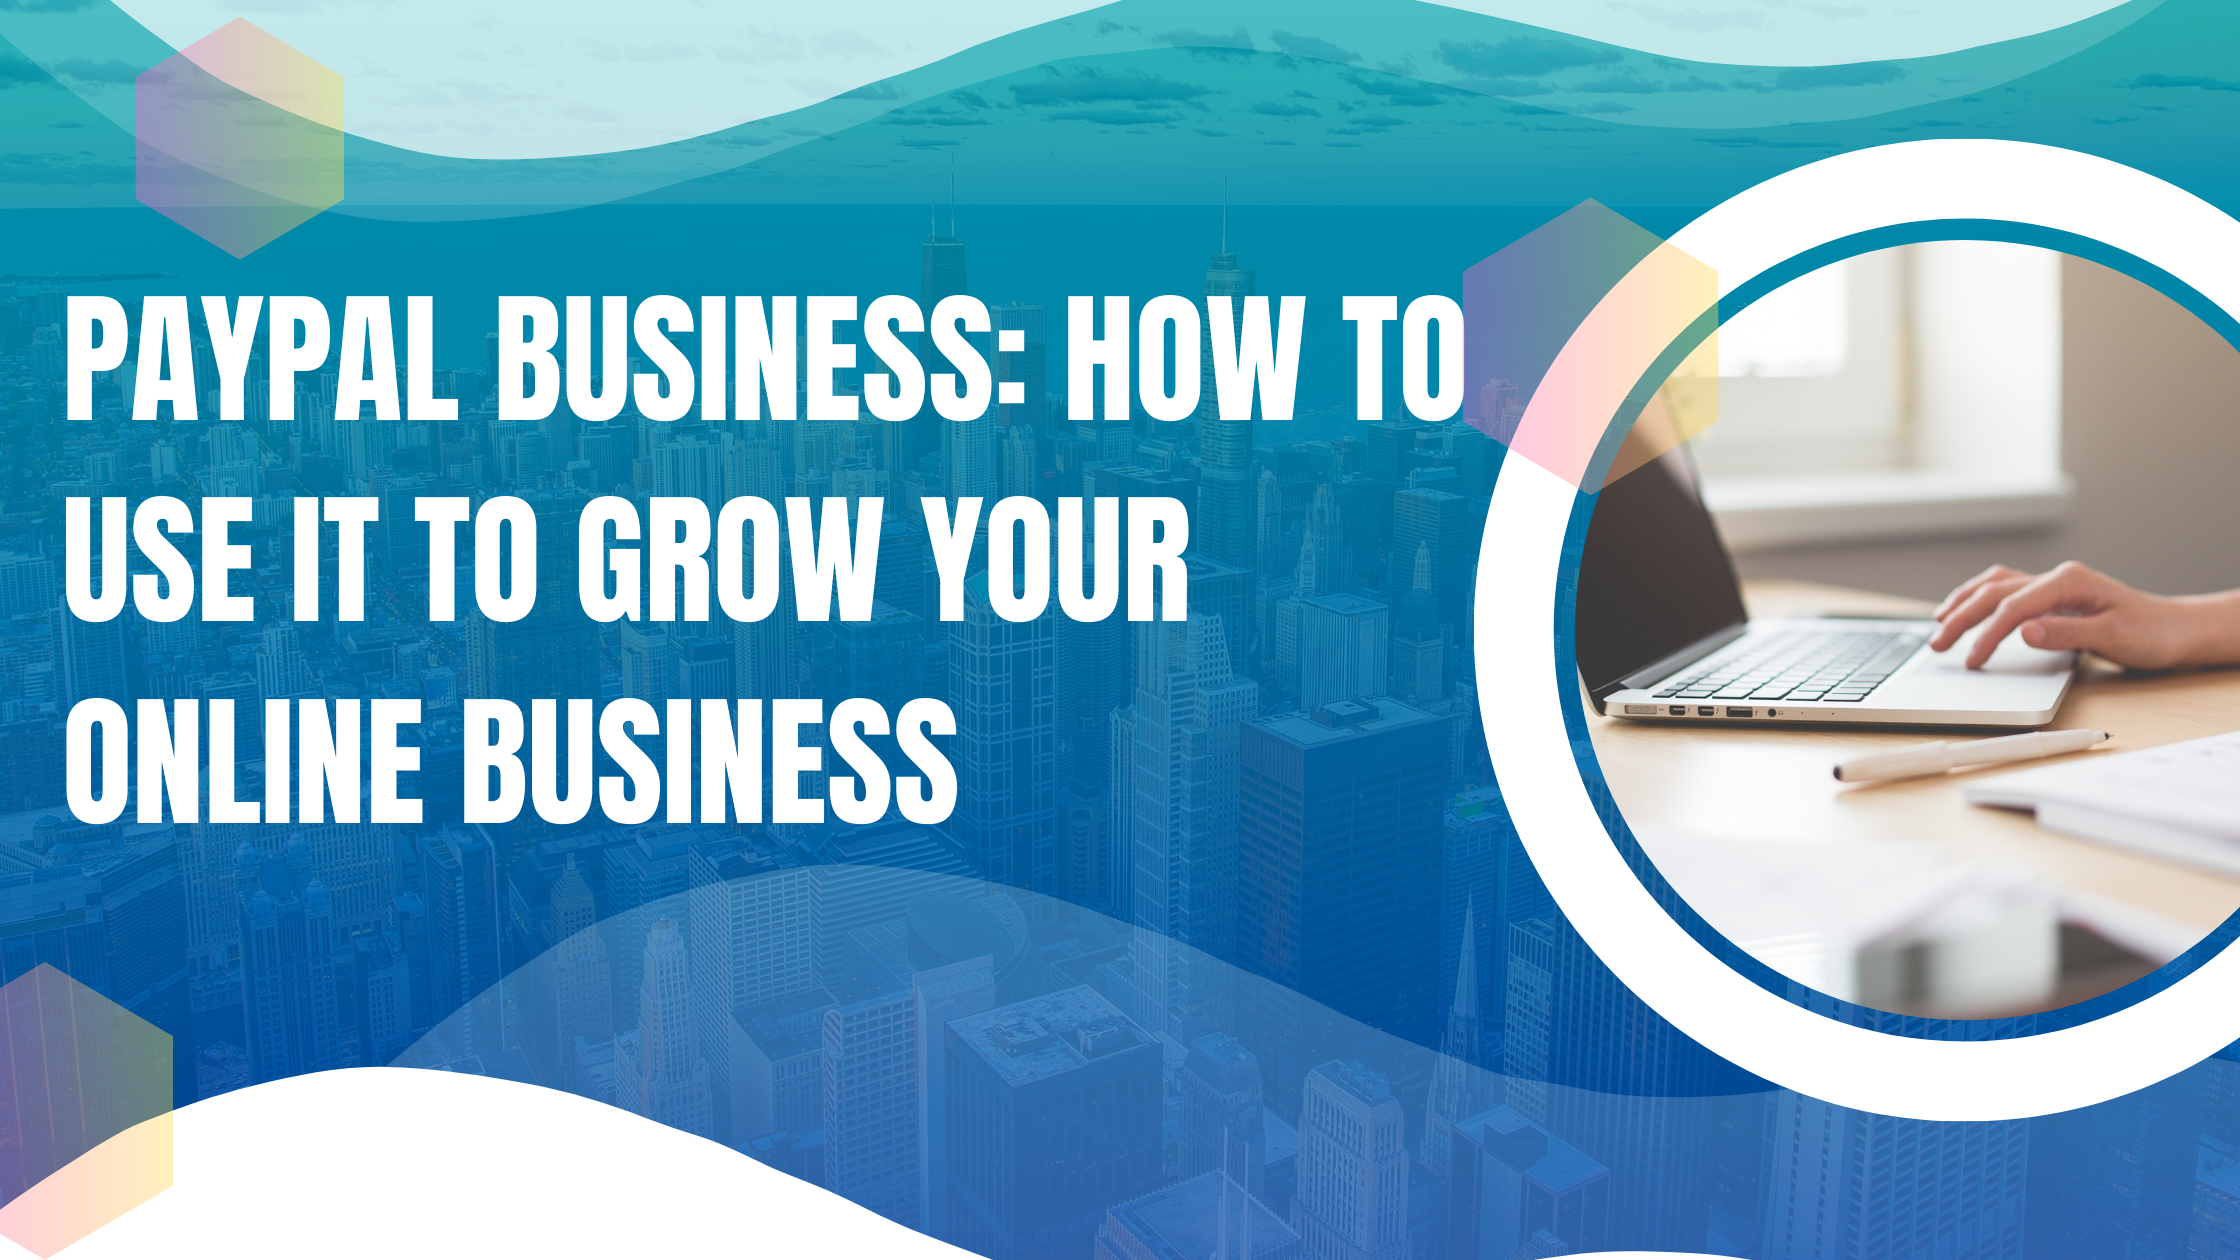 PayPal Business: How to Use It to Grow Your Online Business